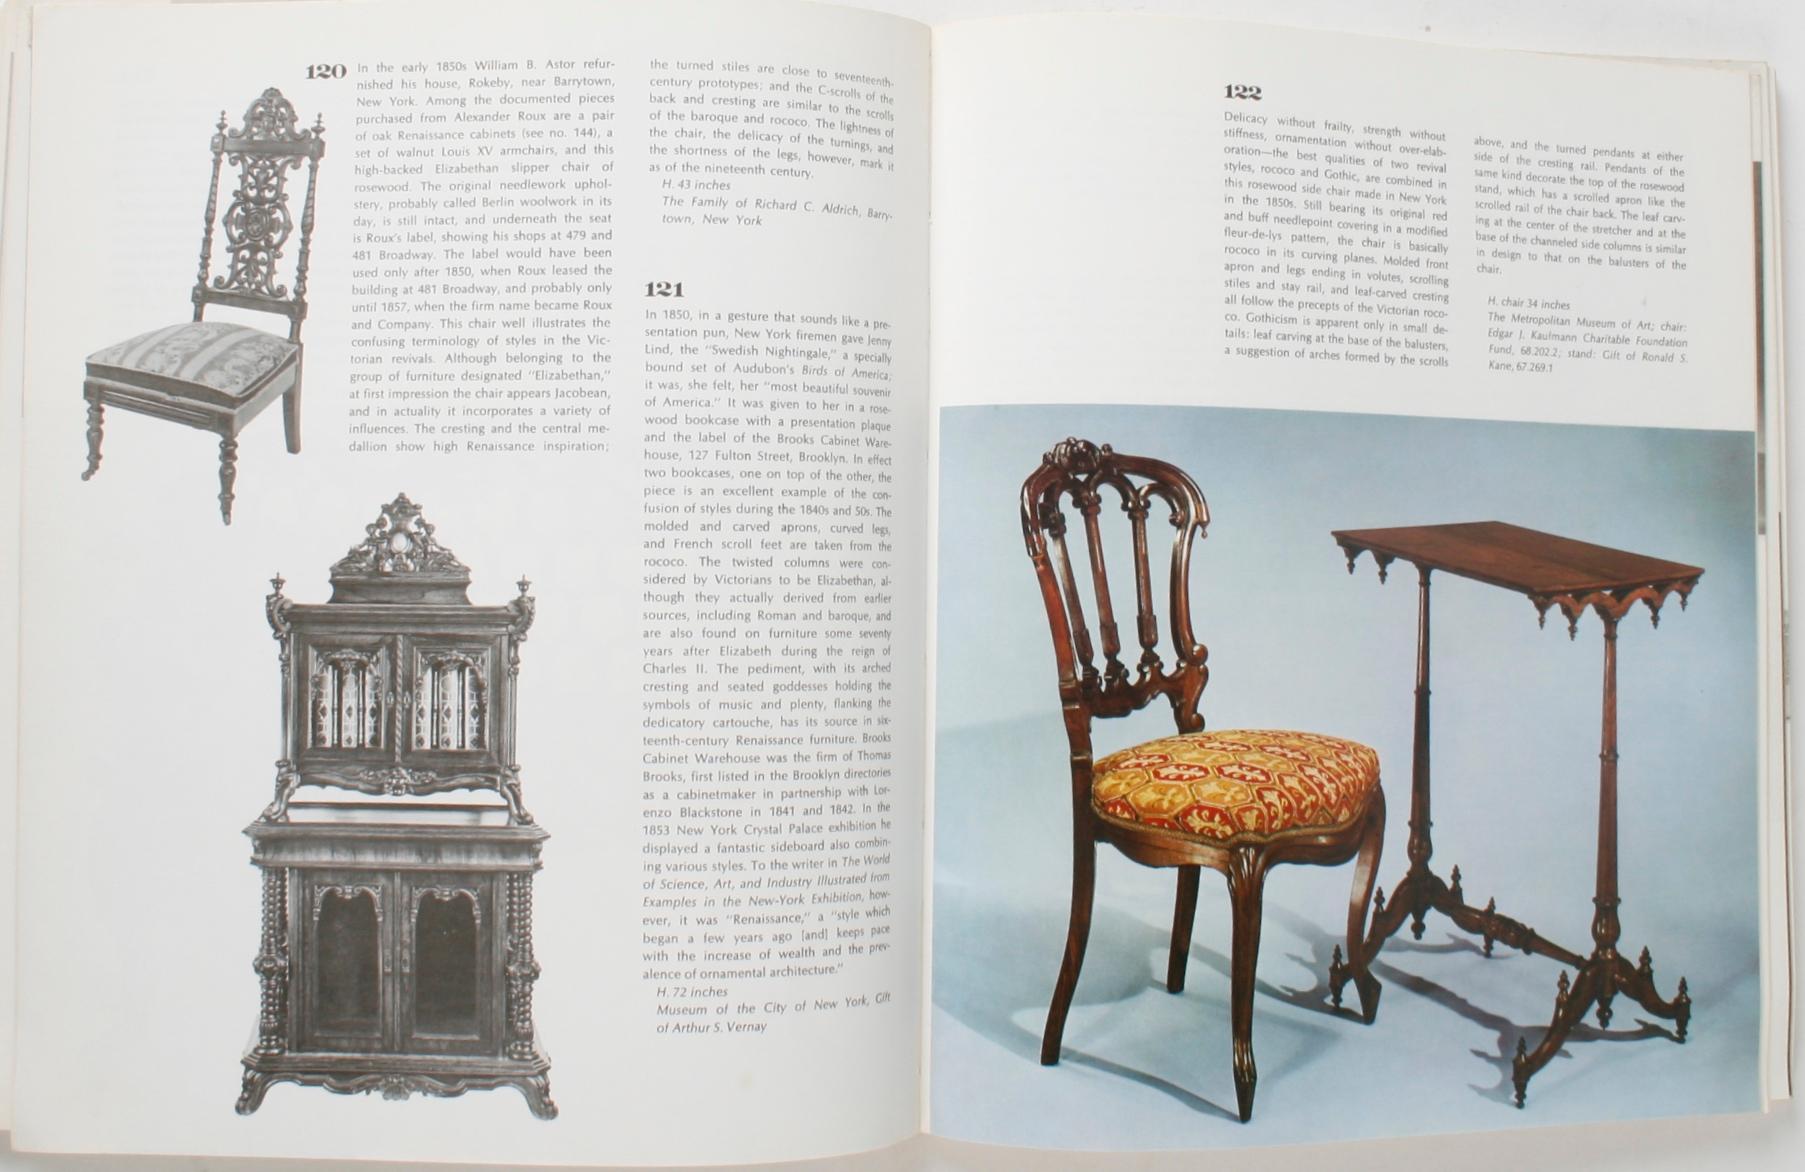 19th century America furniture and other decorative arts, by Berry B. Tracy (Introduction), Marilynn Johnson (Author), Marvin D. Schwartz (Author). Paperback, Metropolitan Museum of Art / New York Graphic Society. 1970 An exhibition in celebration